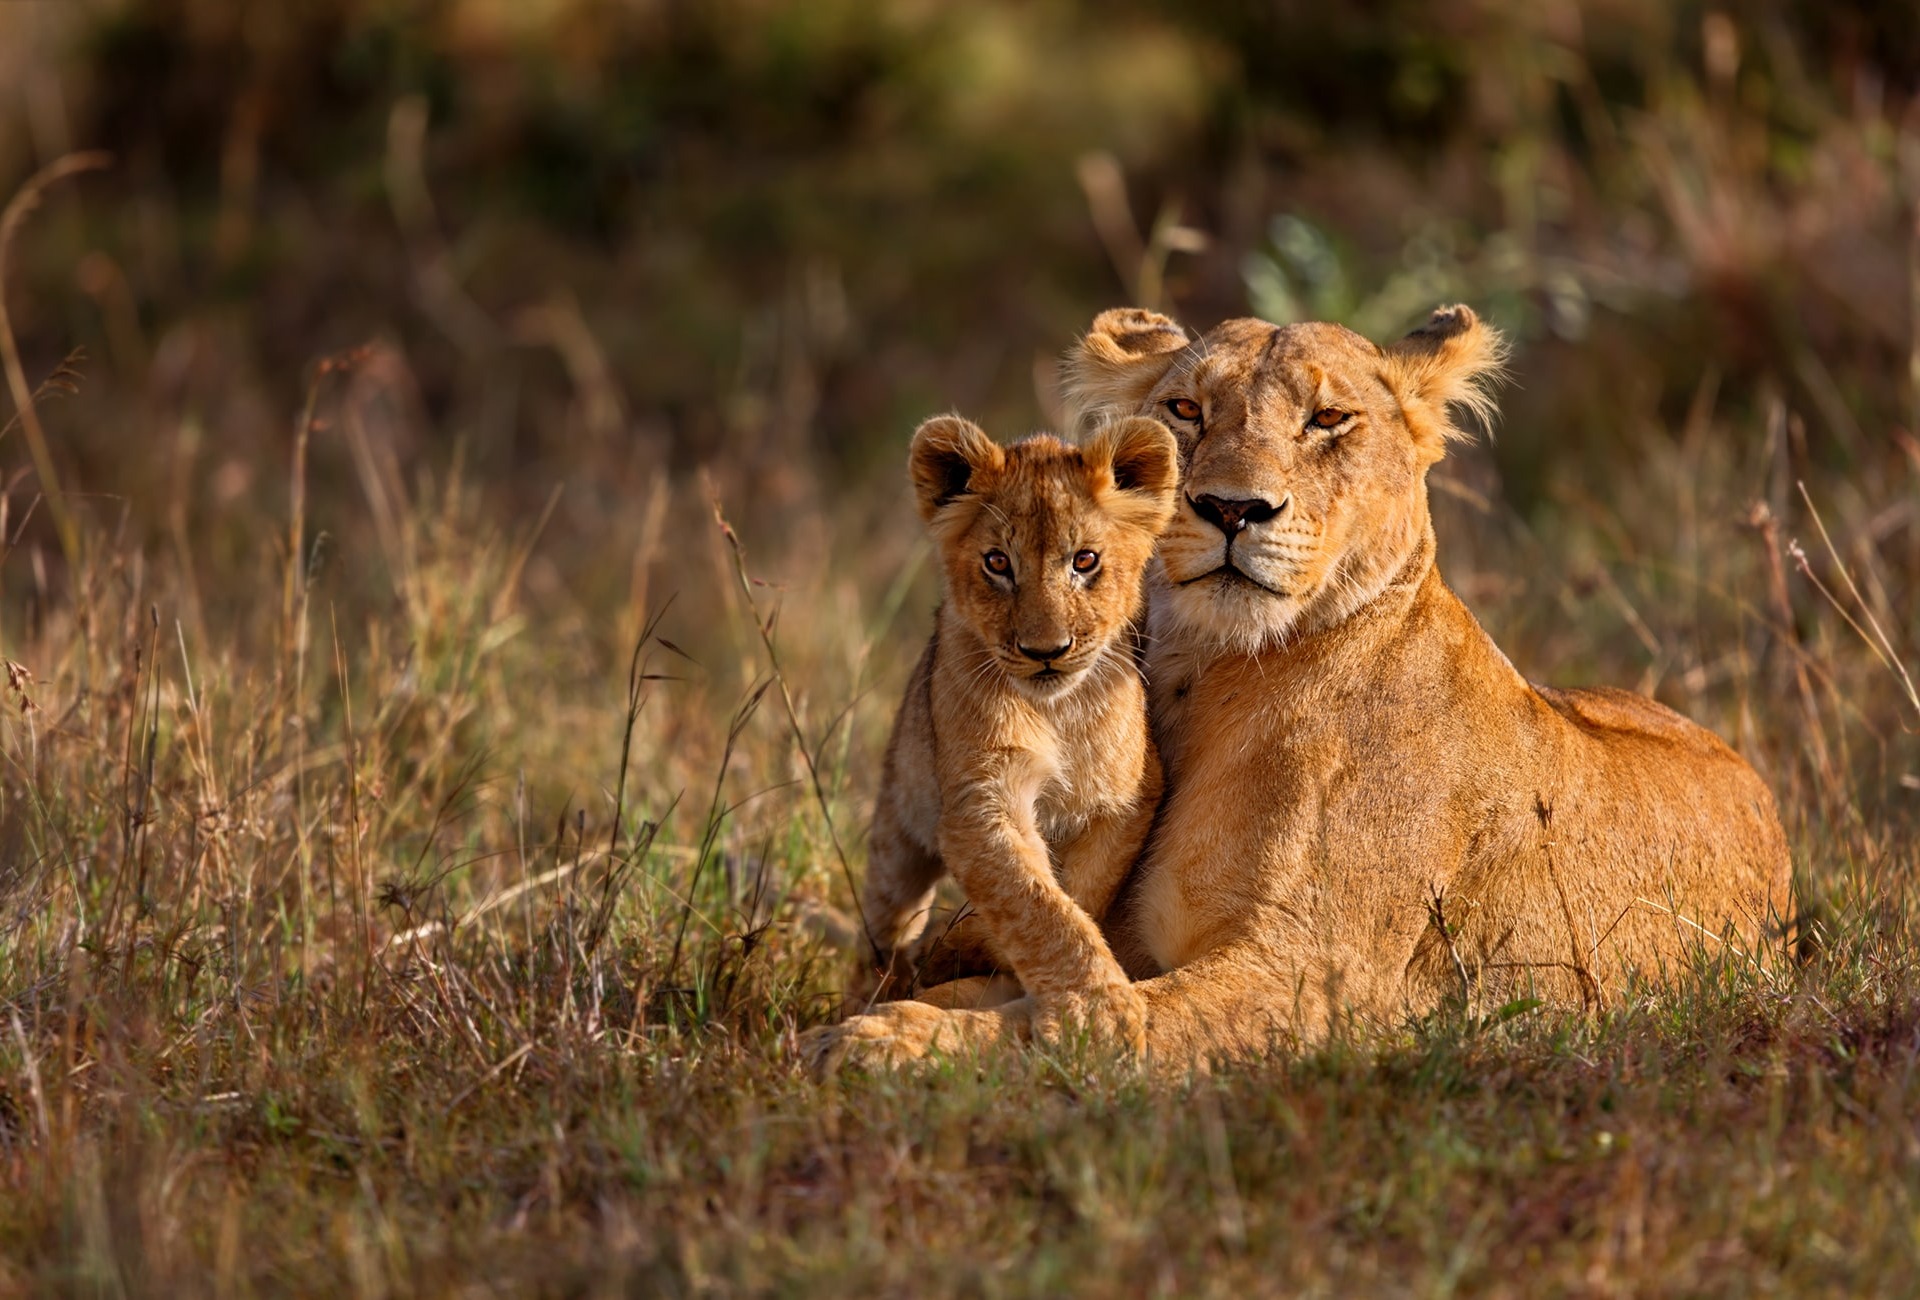 Lion mother with cub, by Maggy Meyer